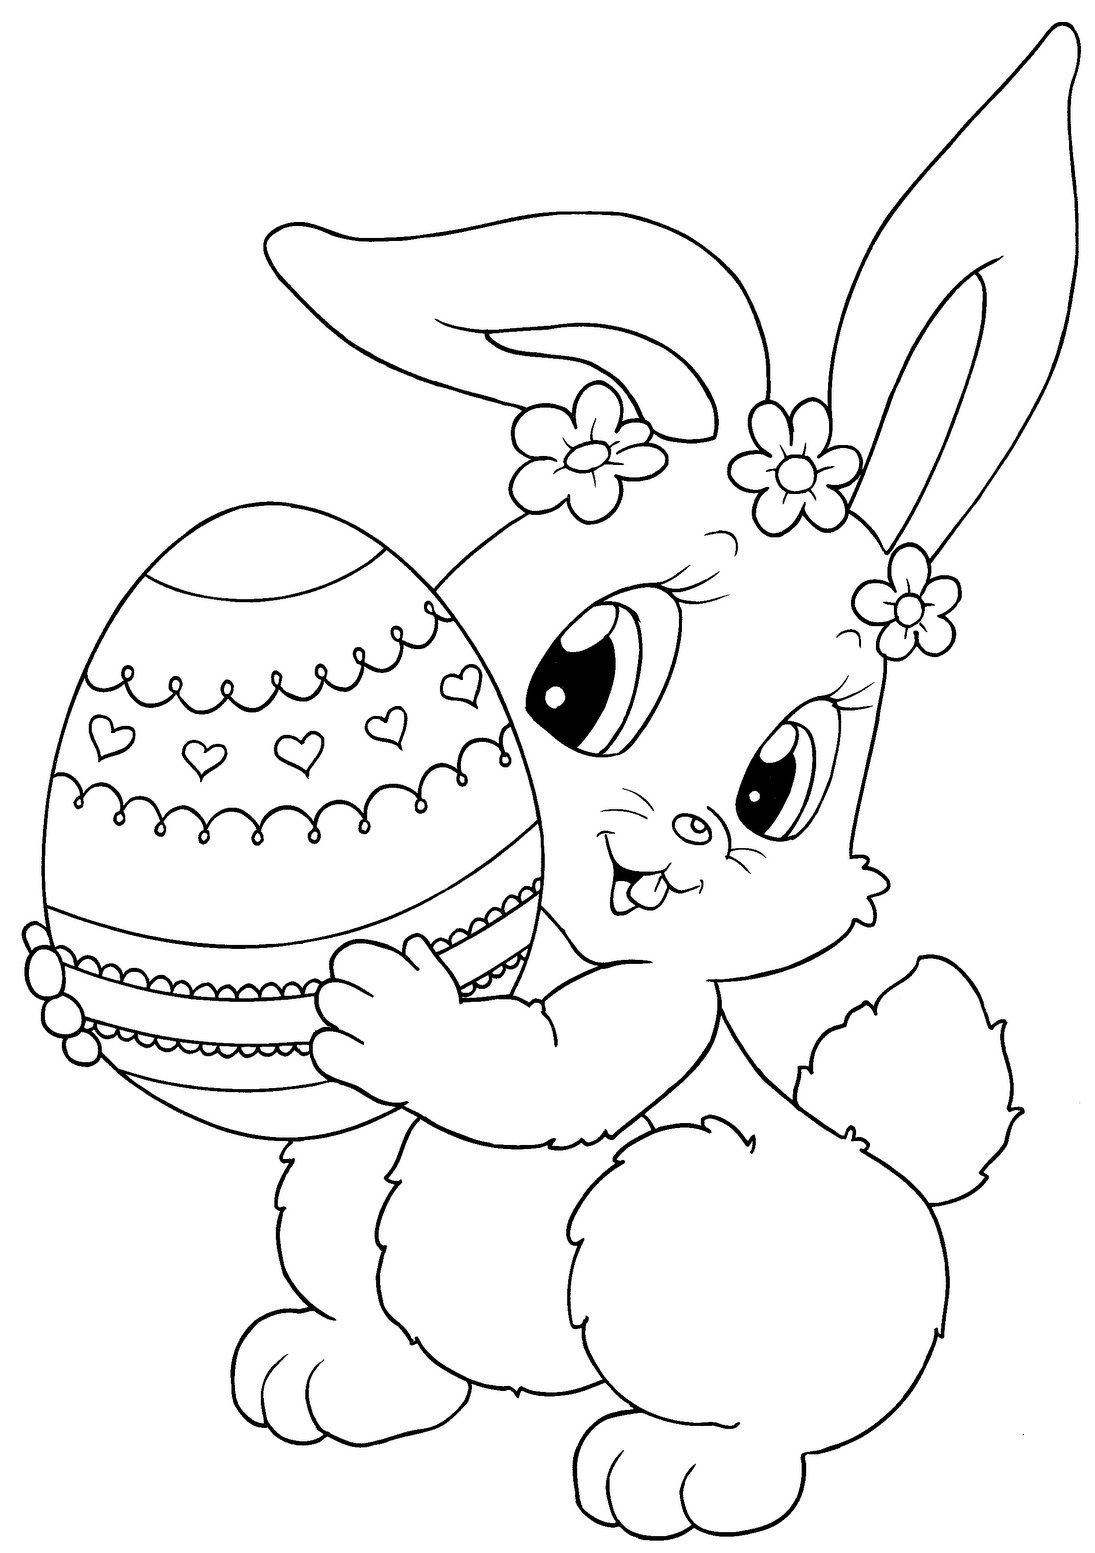 Top 15 Free Printable Easter Bunny Coloring Pages Online | Зентангл - Free Printable Easter Coloring Pages